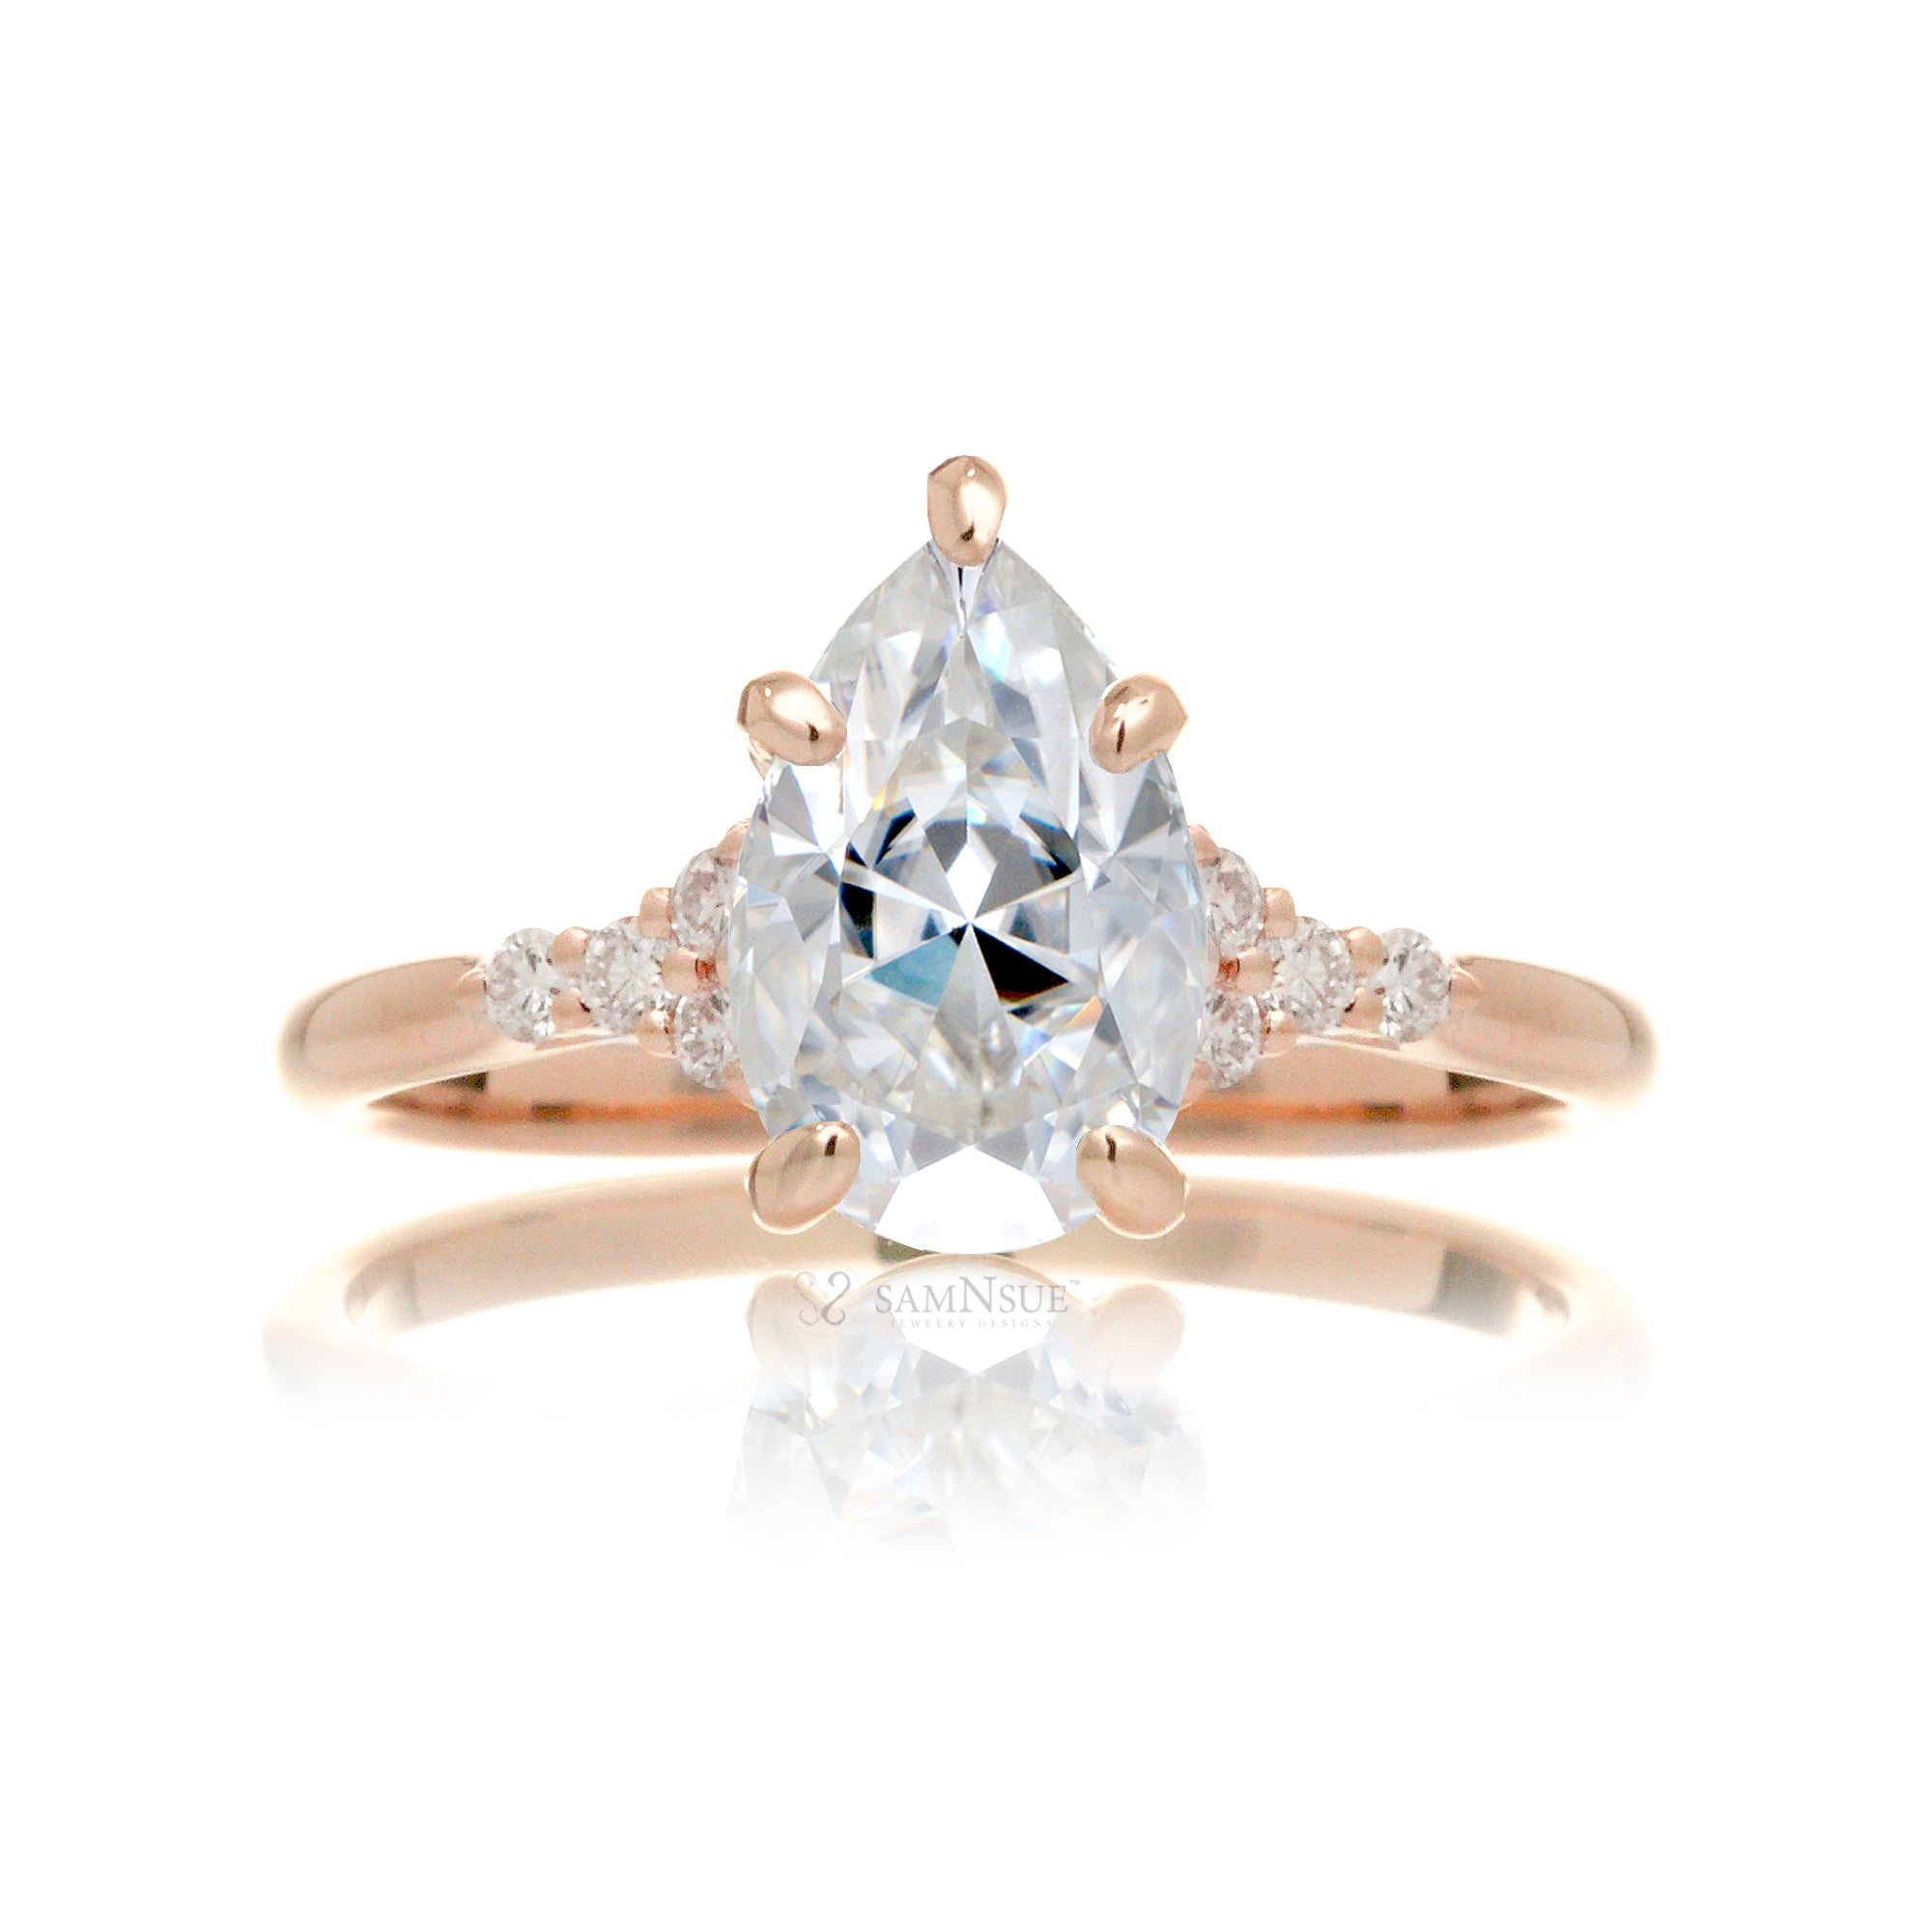  Pear moissanite ring with diamond accent on rose gold - the Chloe